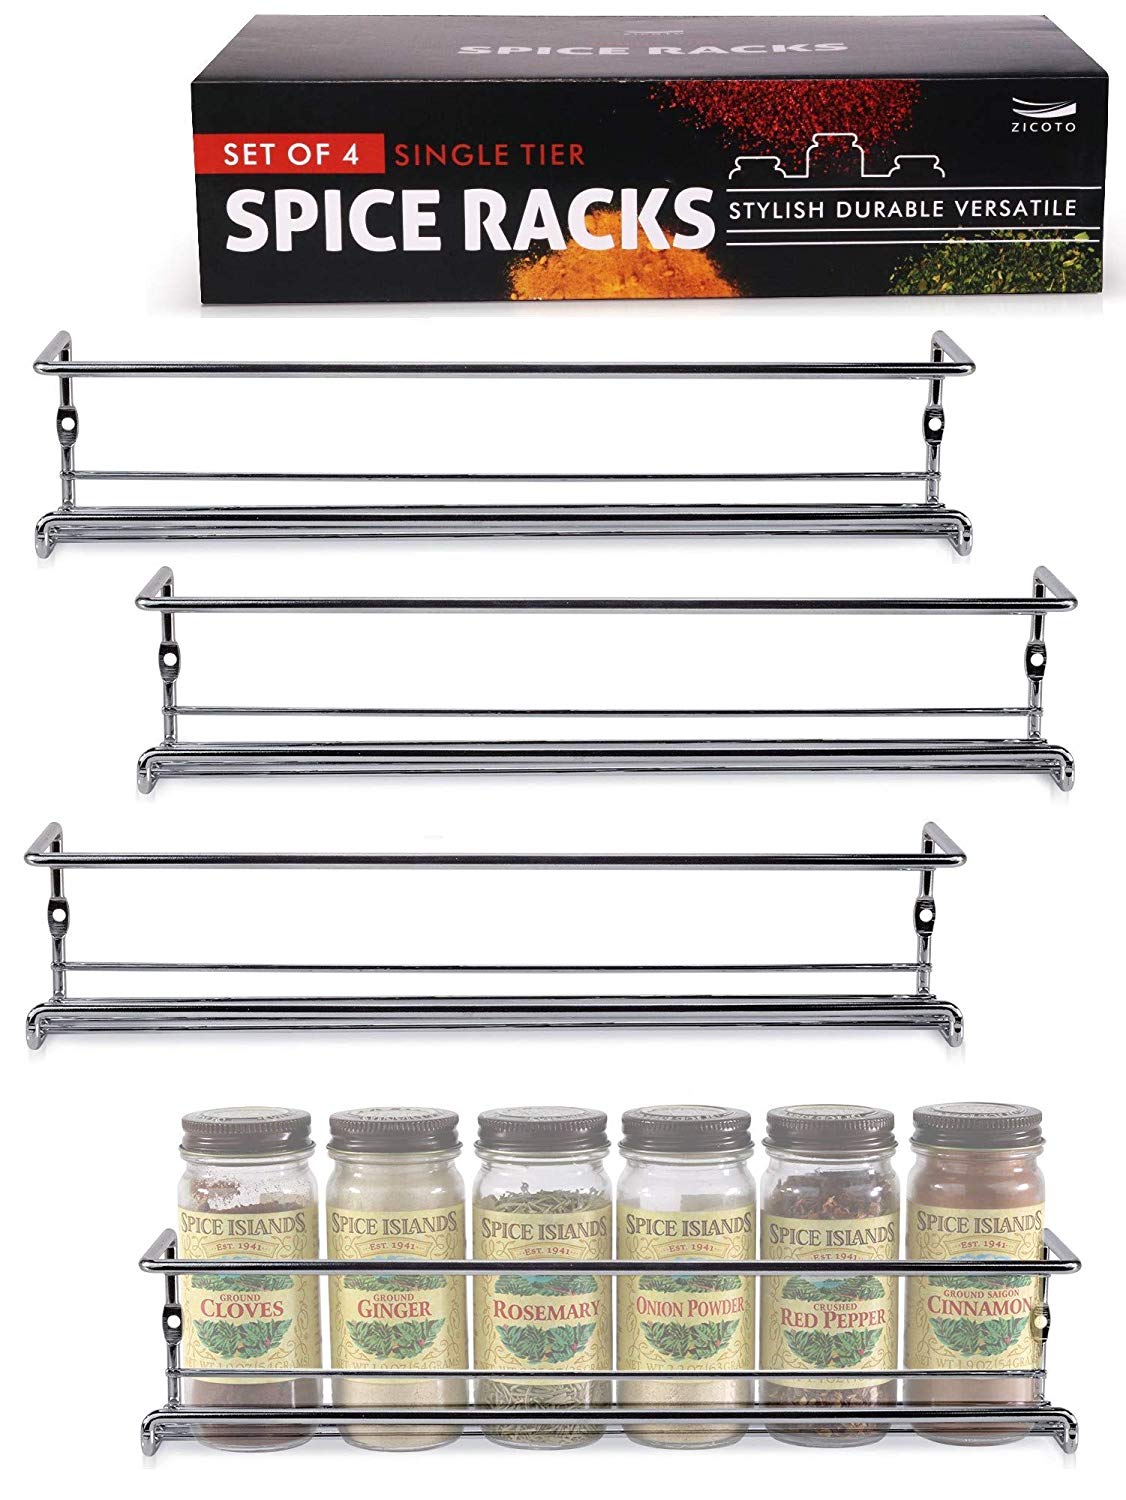 Gorgeous Spice Rack Organizer for Cabinets or Wall Mounts - Space Saving Set of 4 Hanging Racks - Perfect Seasoning Organizer For Your Kitchen Cabinet, Cupboard or Pantry Door